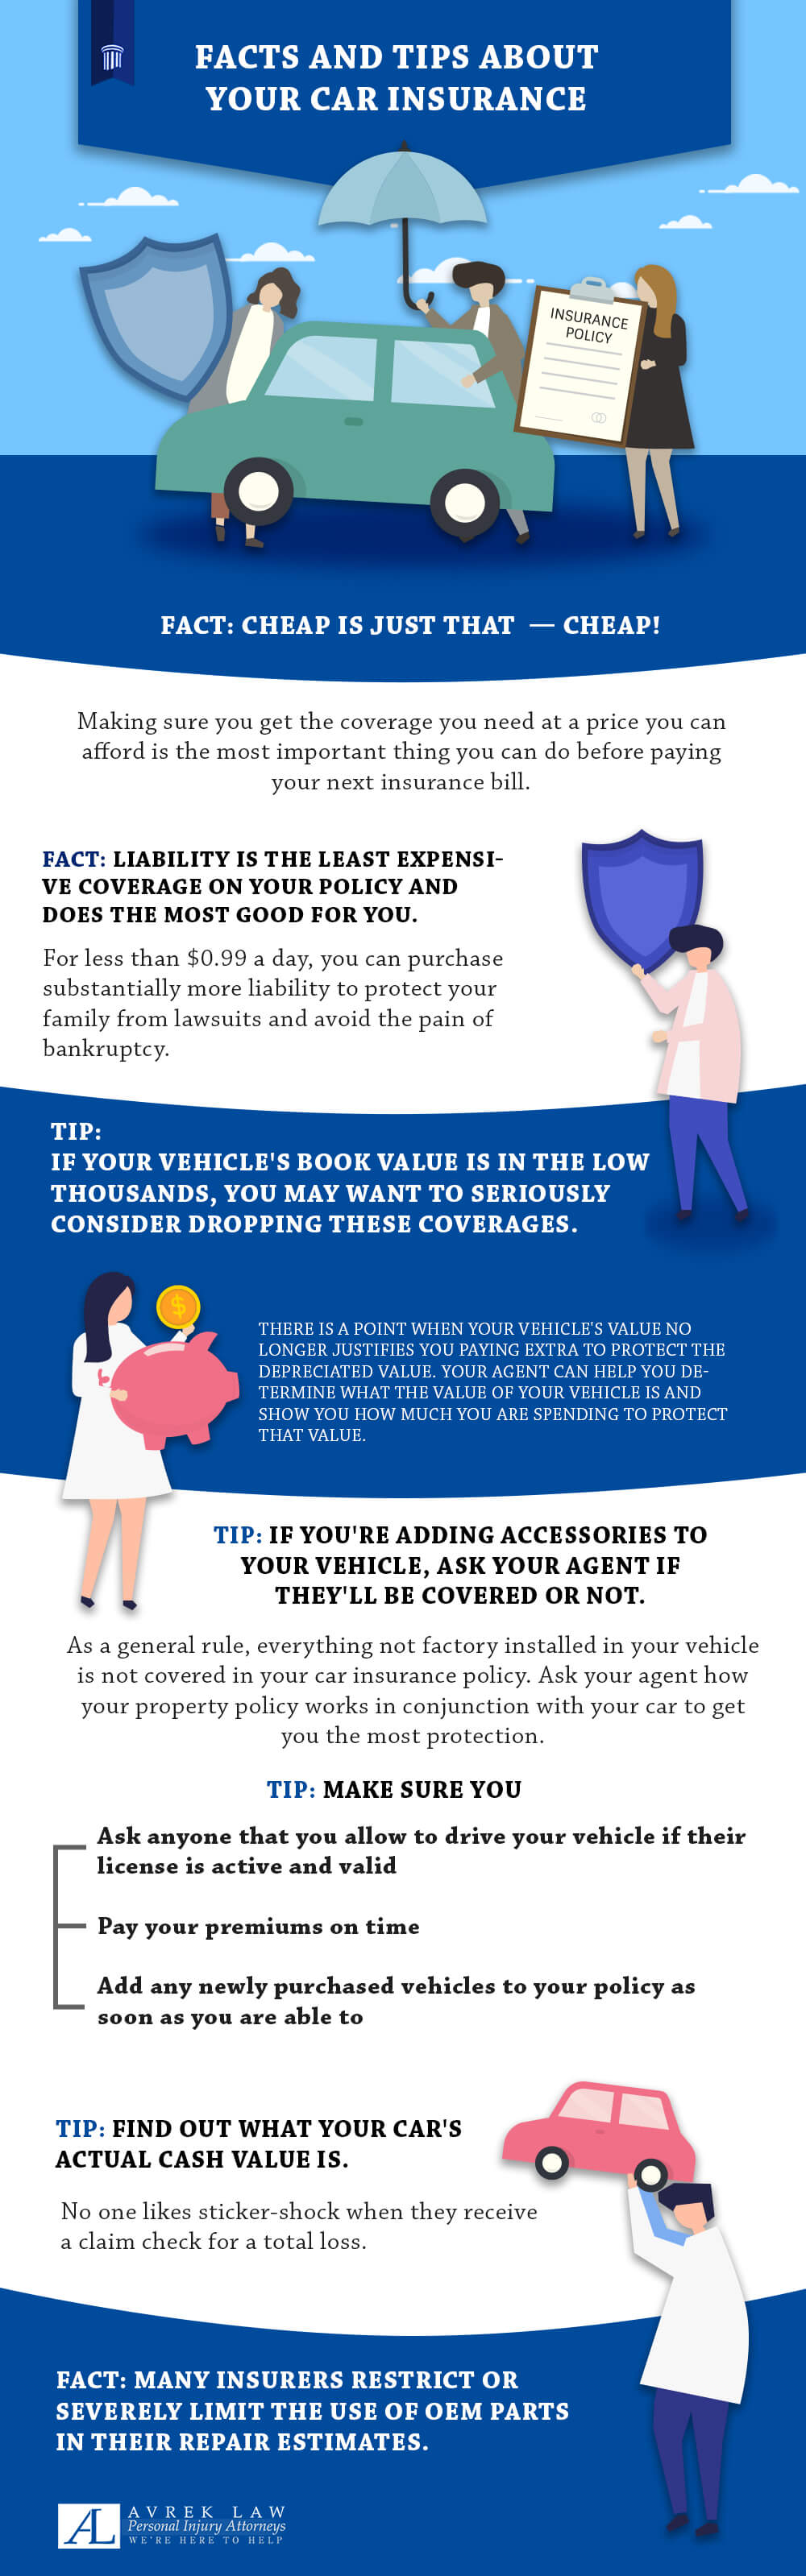 What you need to know about multiple-car policies for your family